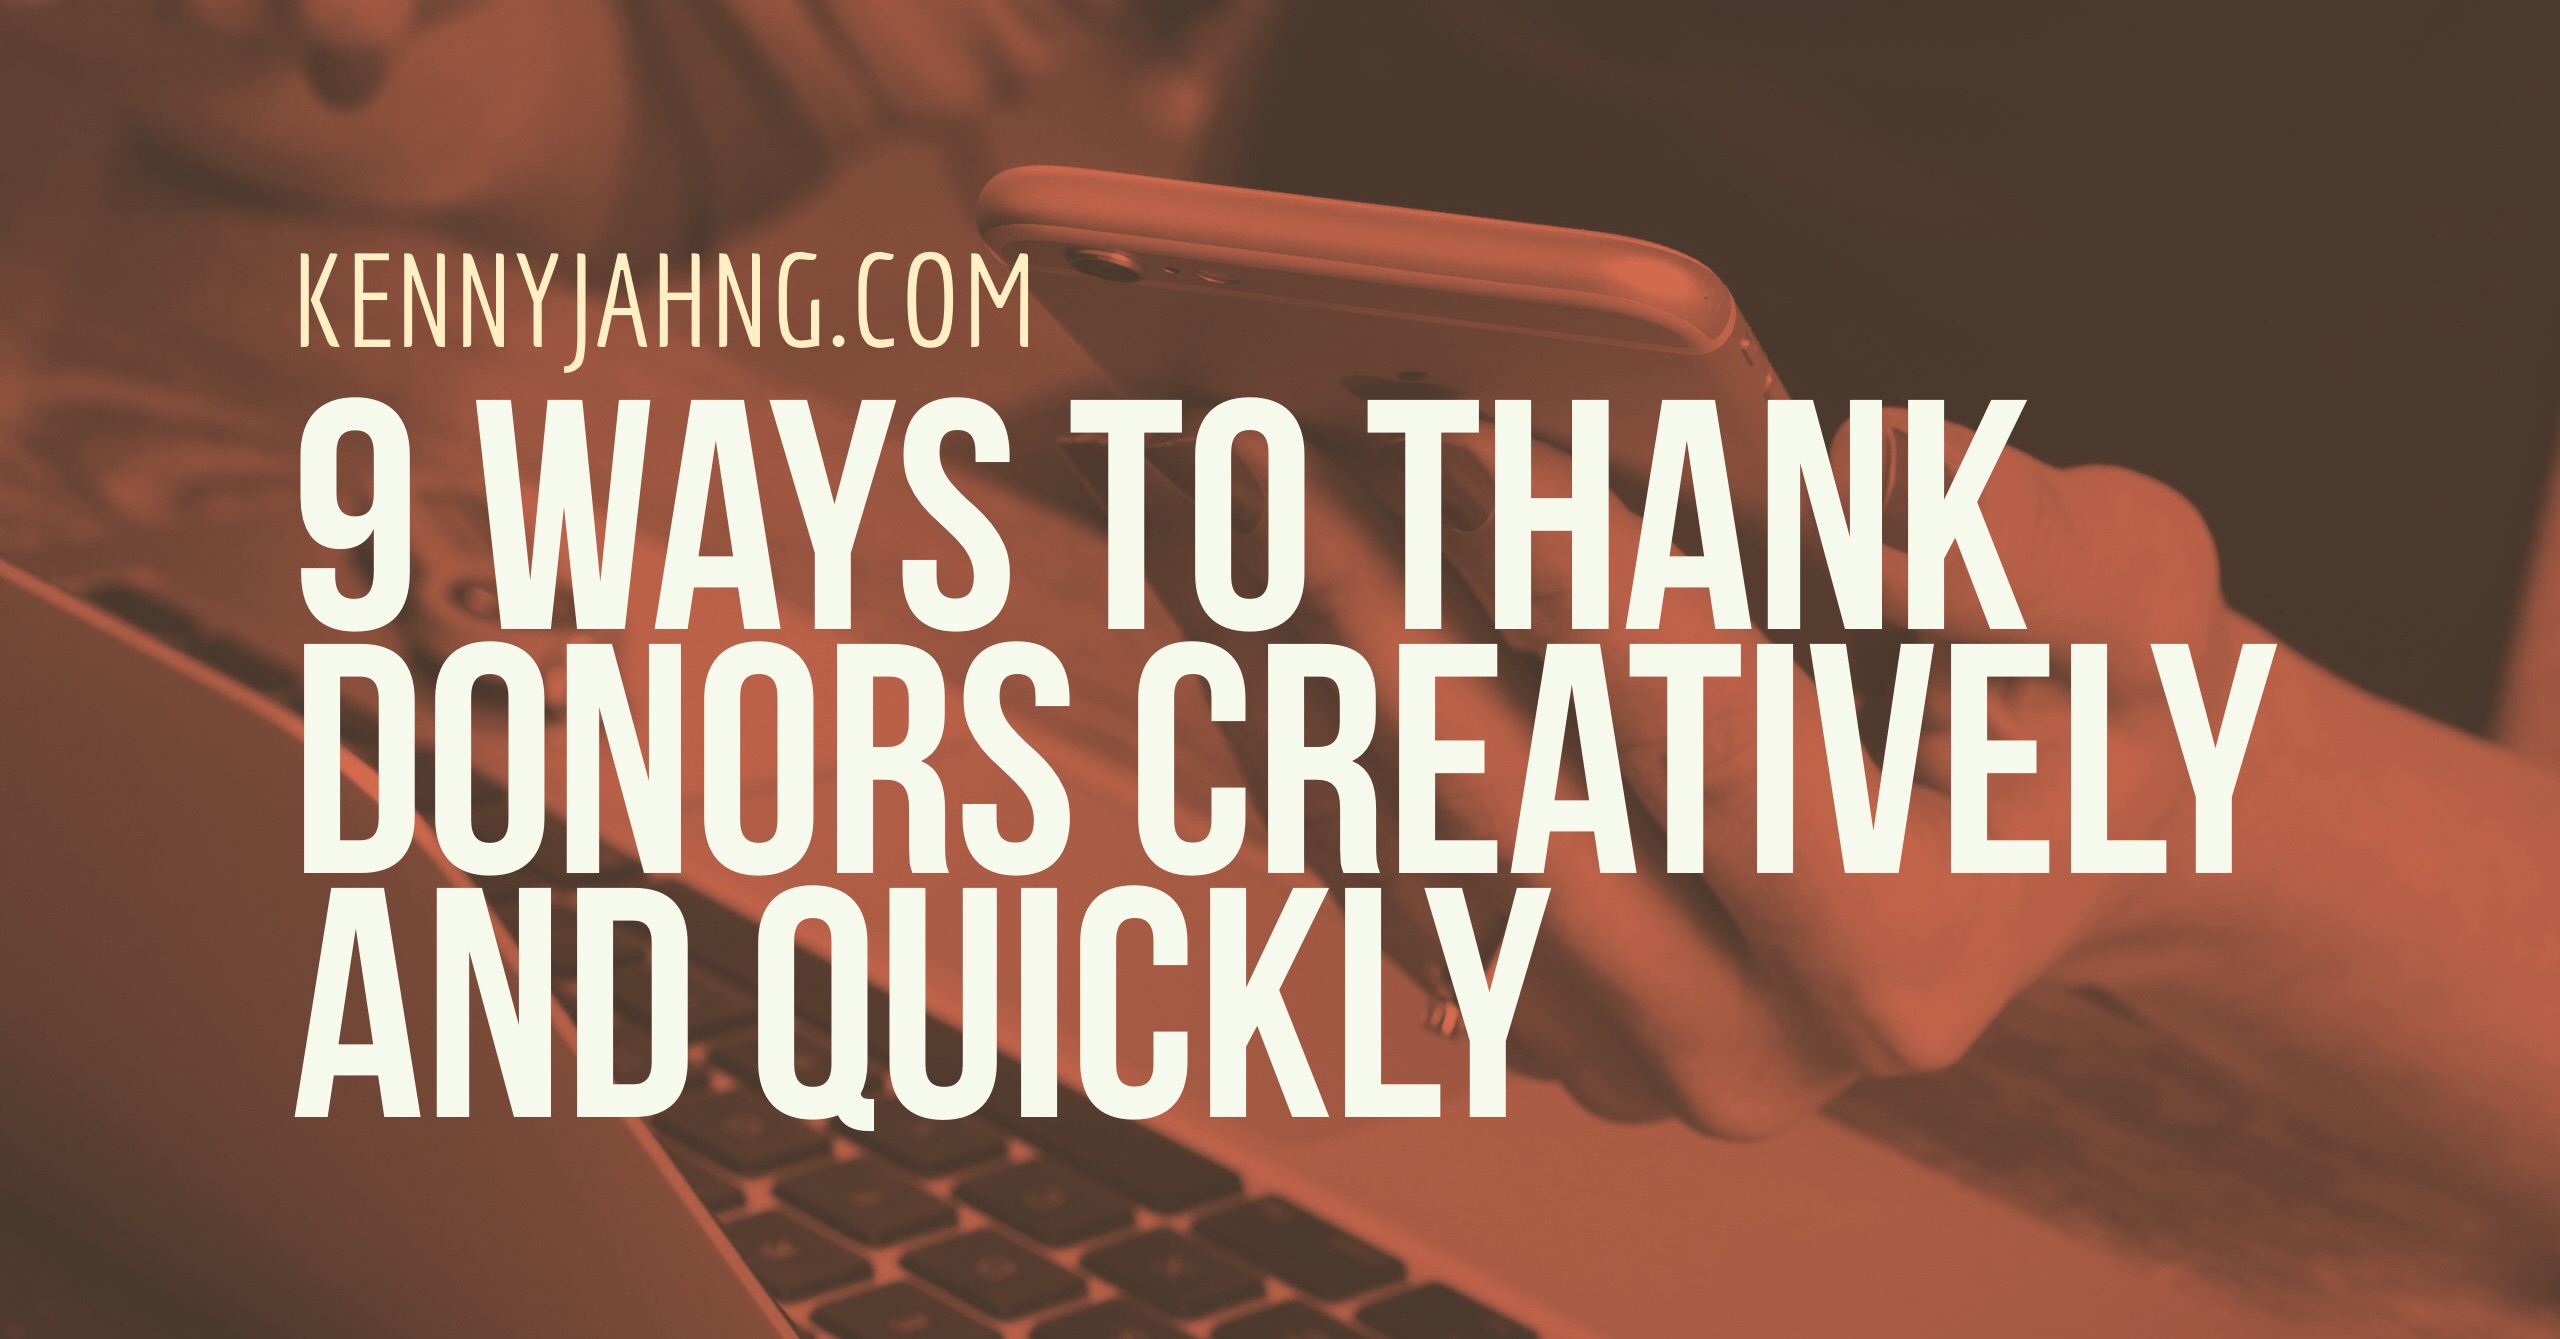 9 Ways to Thank Donors Creatively and Quickly